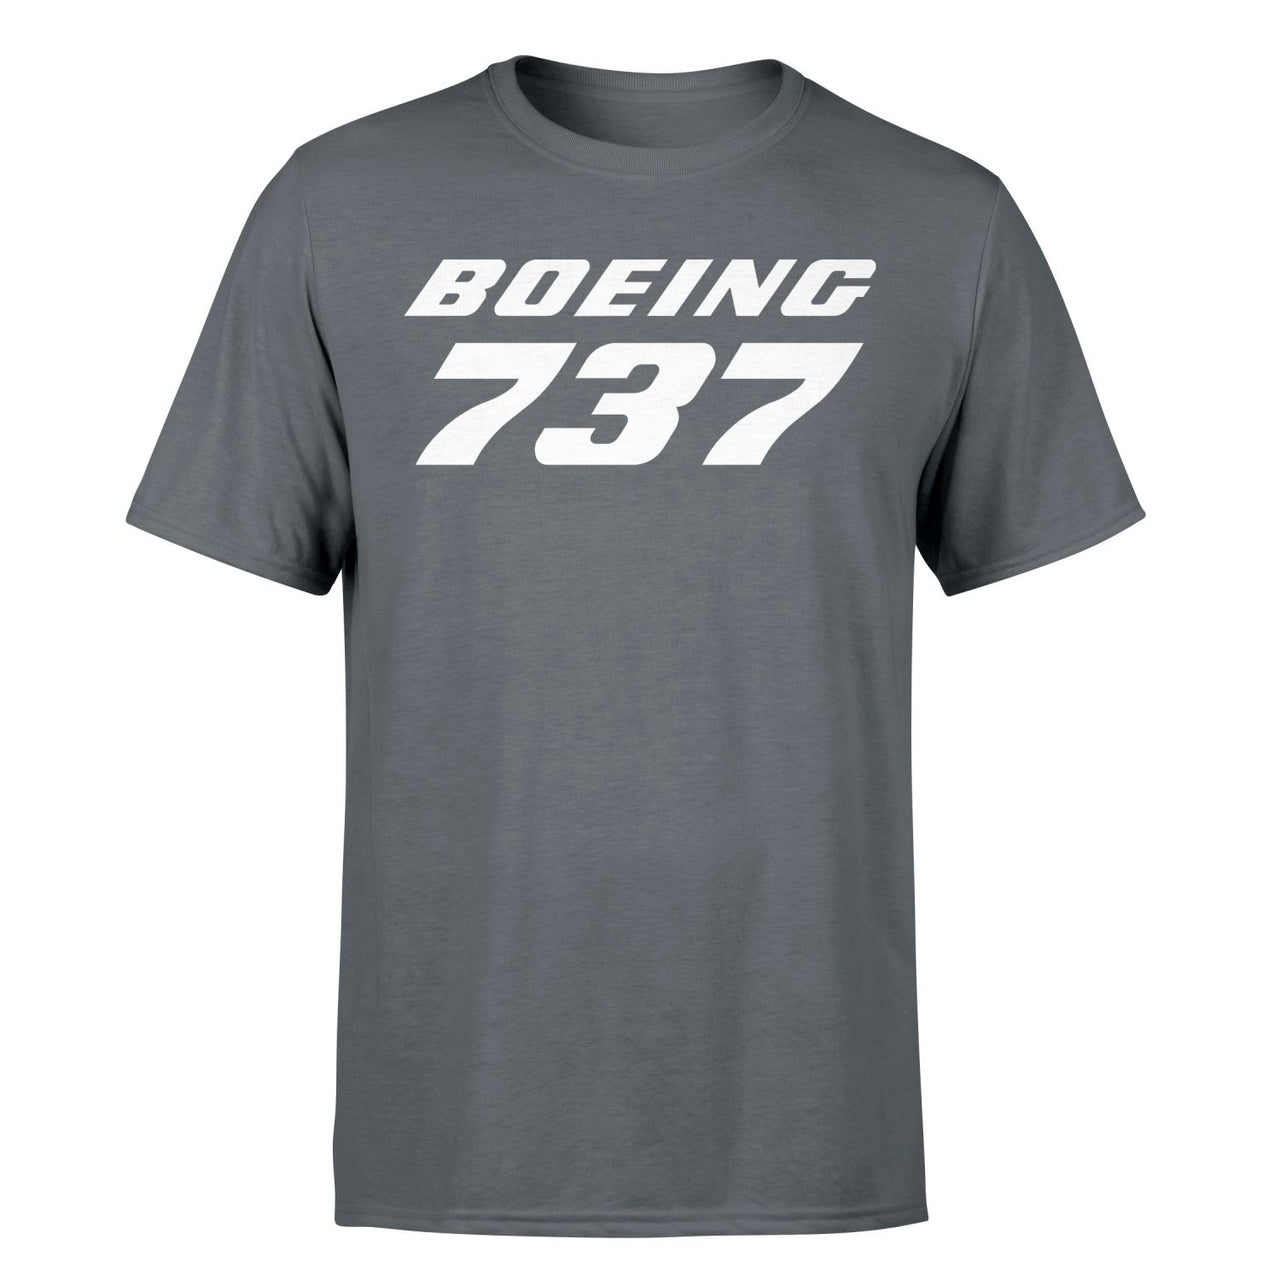 Boeing 737 & Text Designed T-Shirts